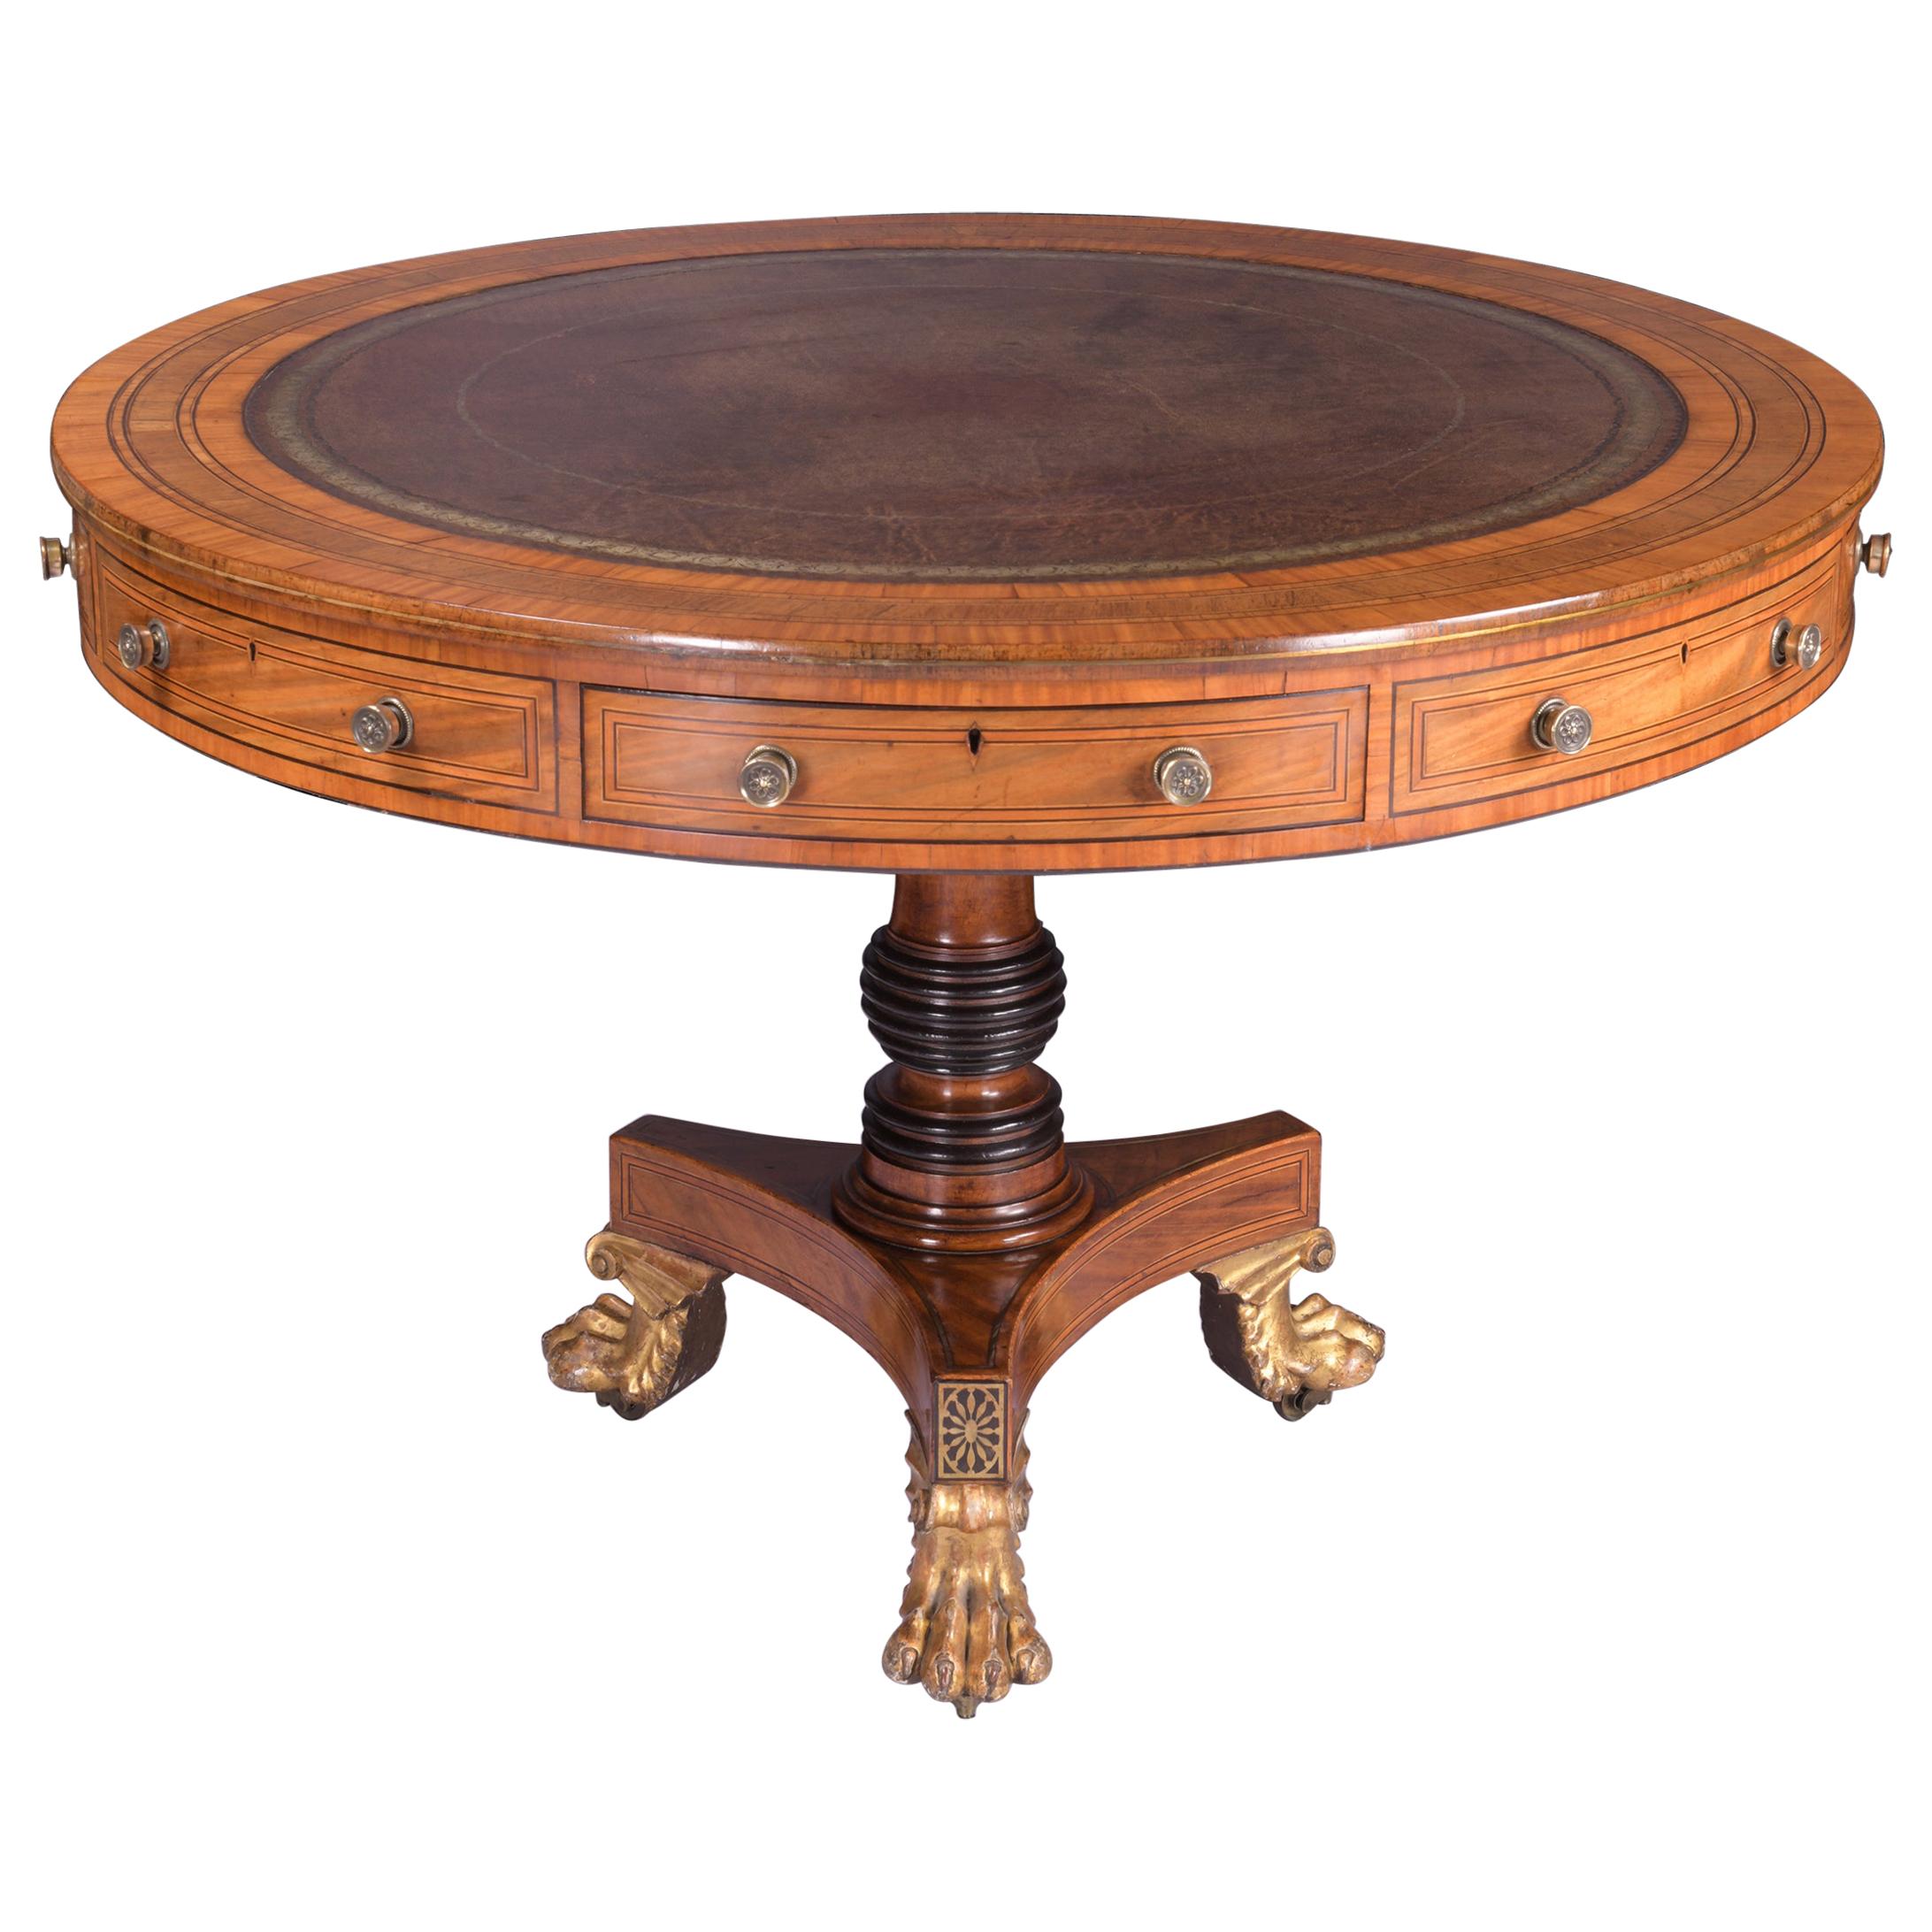 Early 19th Century English Regency Satinwood Centre/Drum Table For Sale